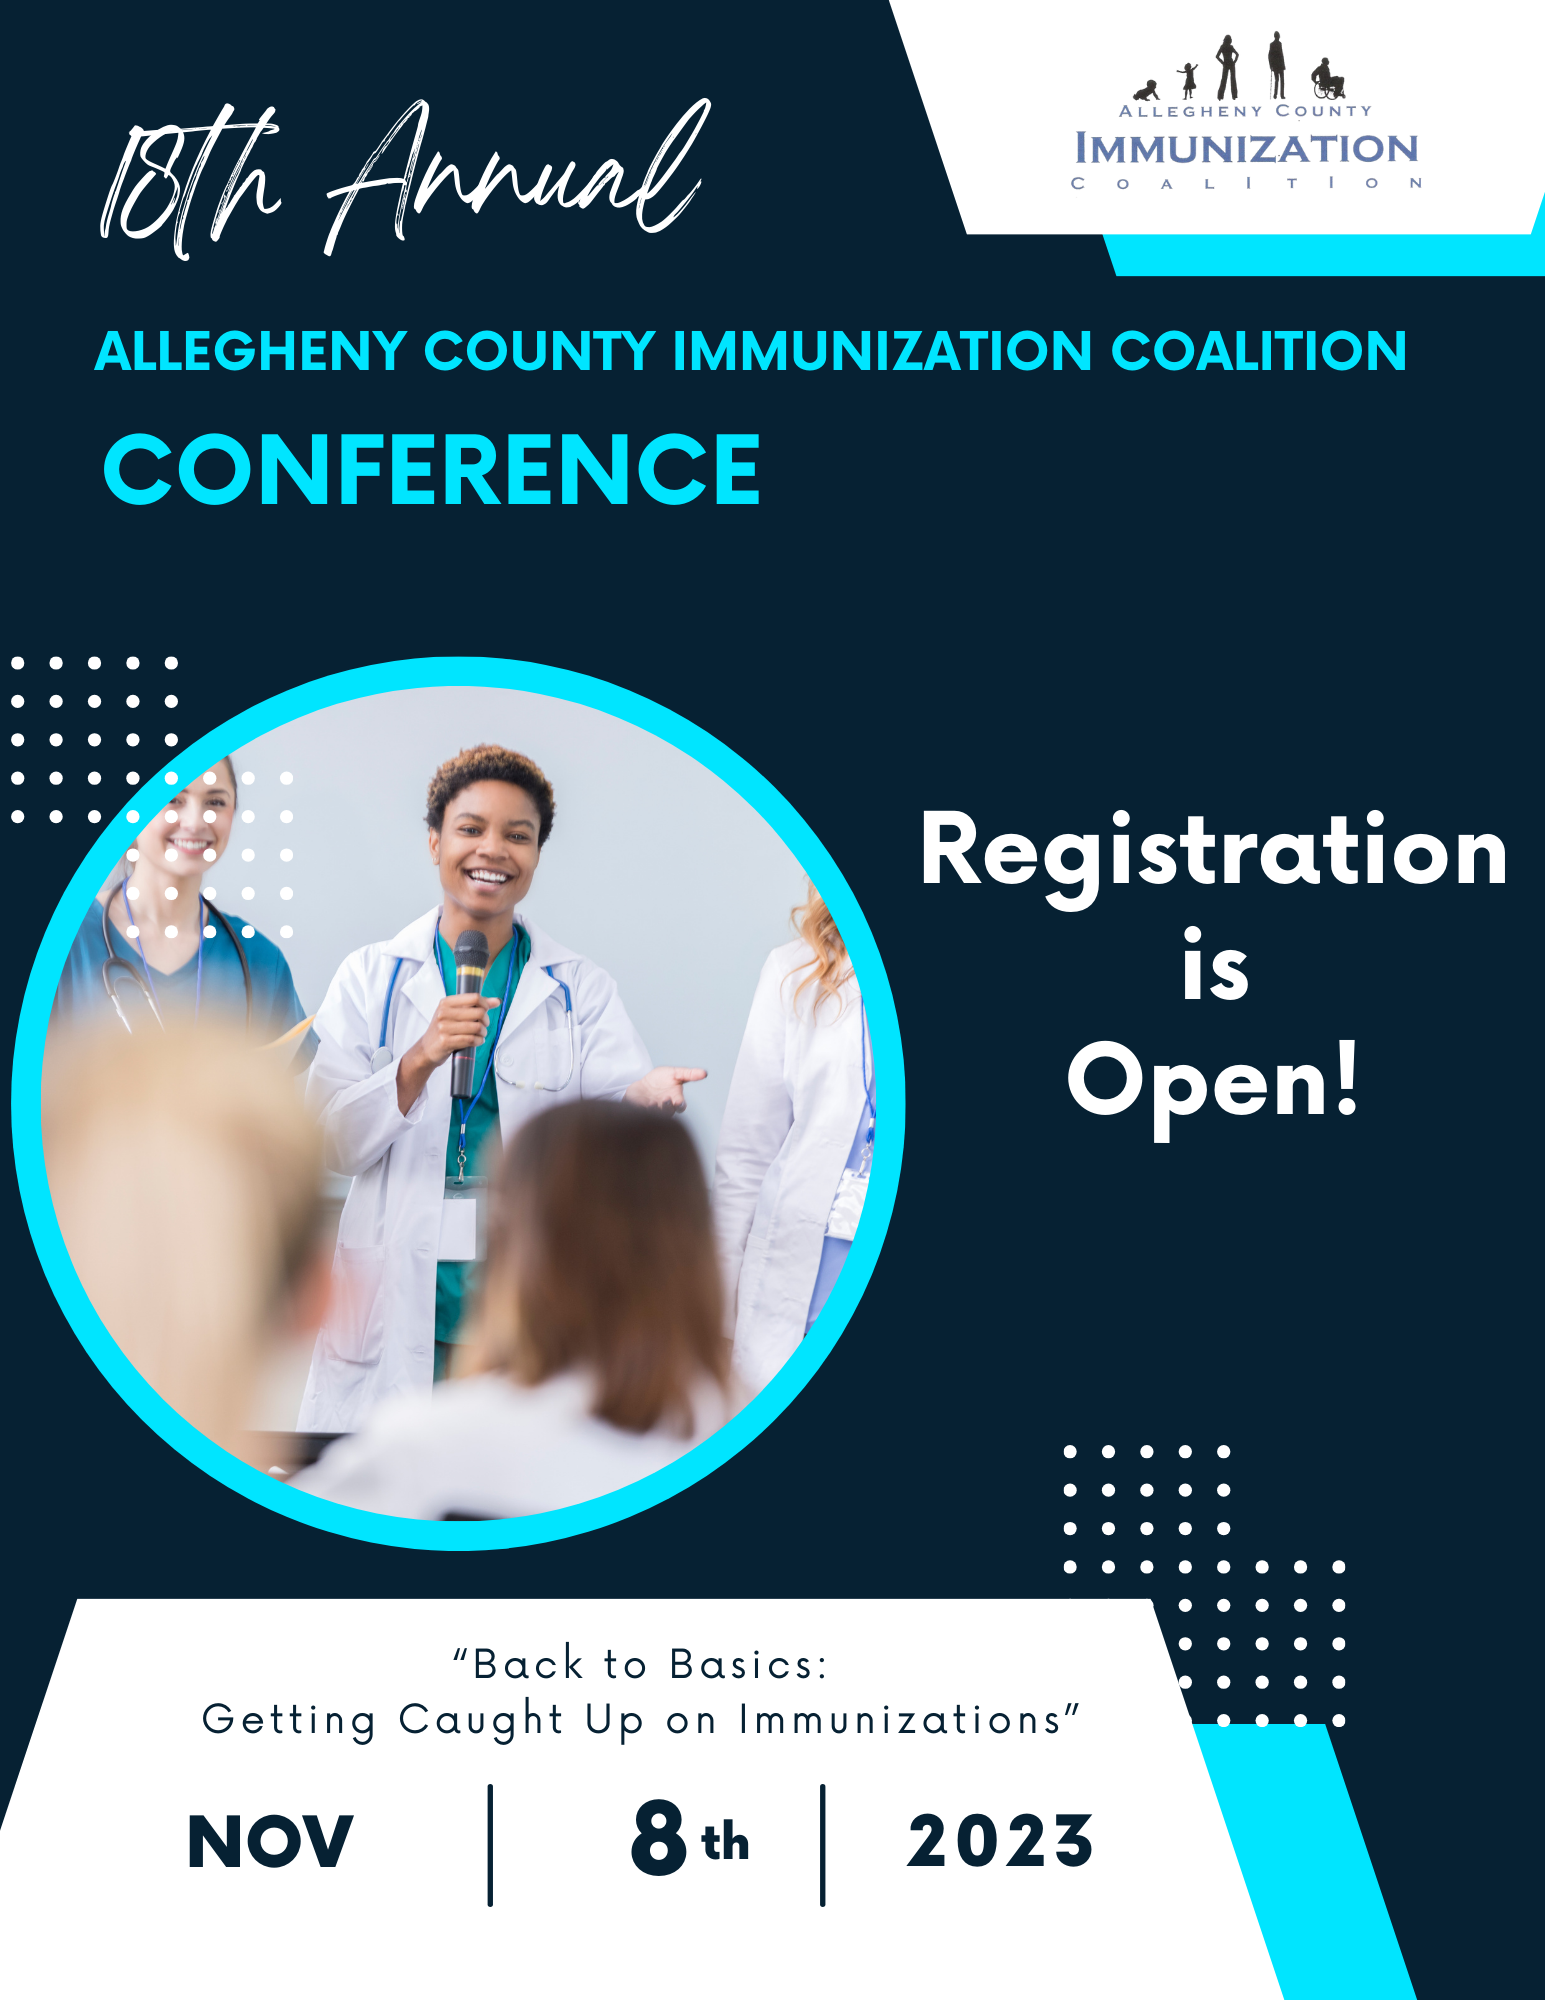 The Allegheny County Immunization Coalition's 18th Annual Conference